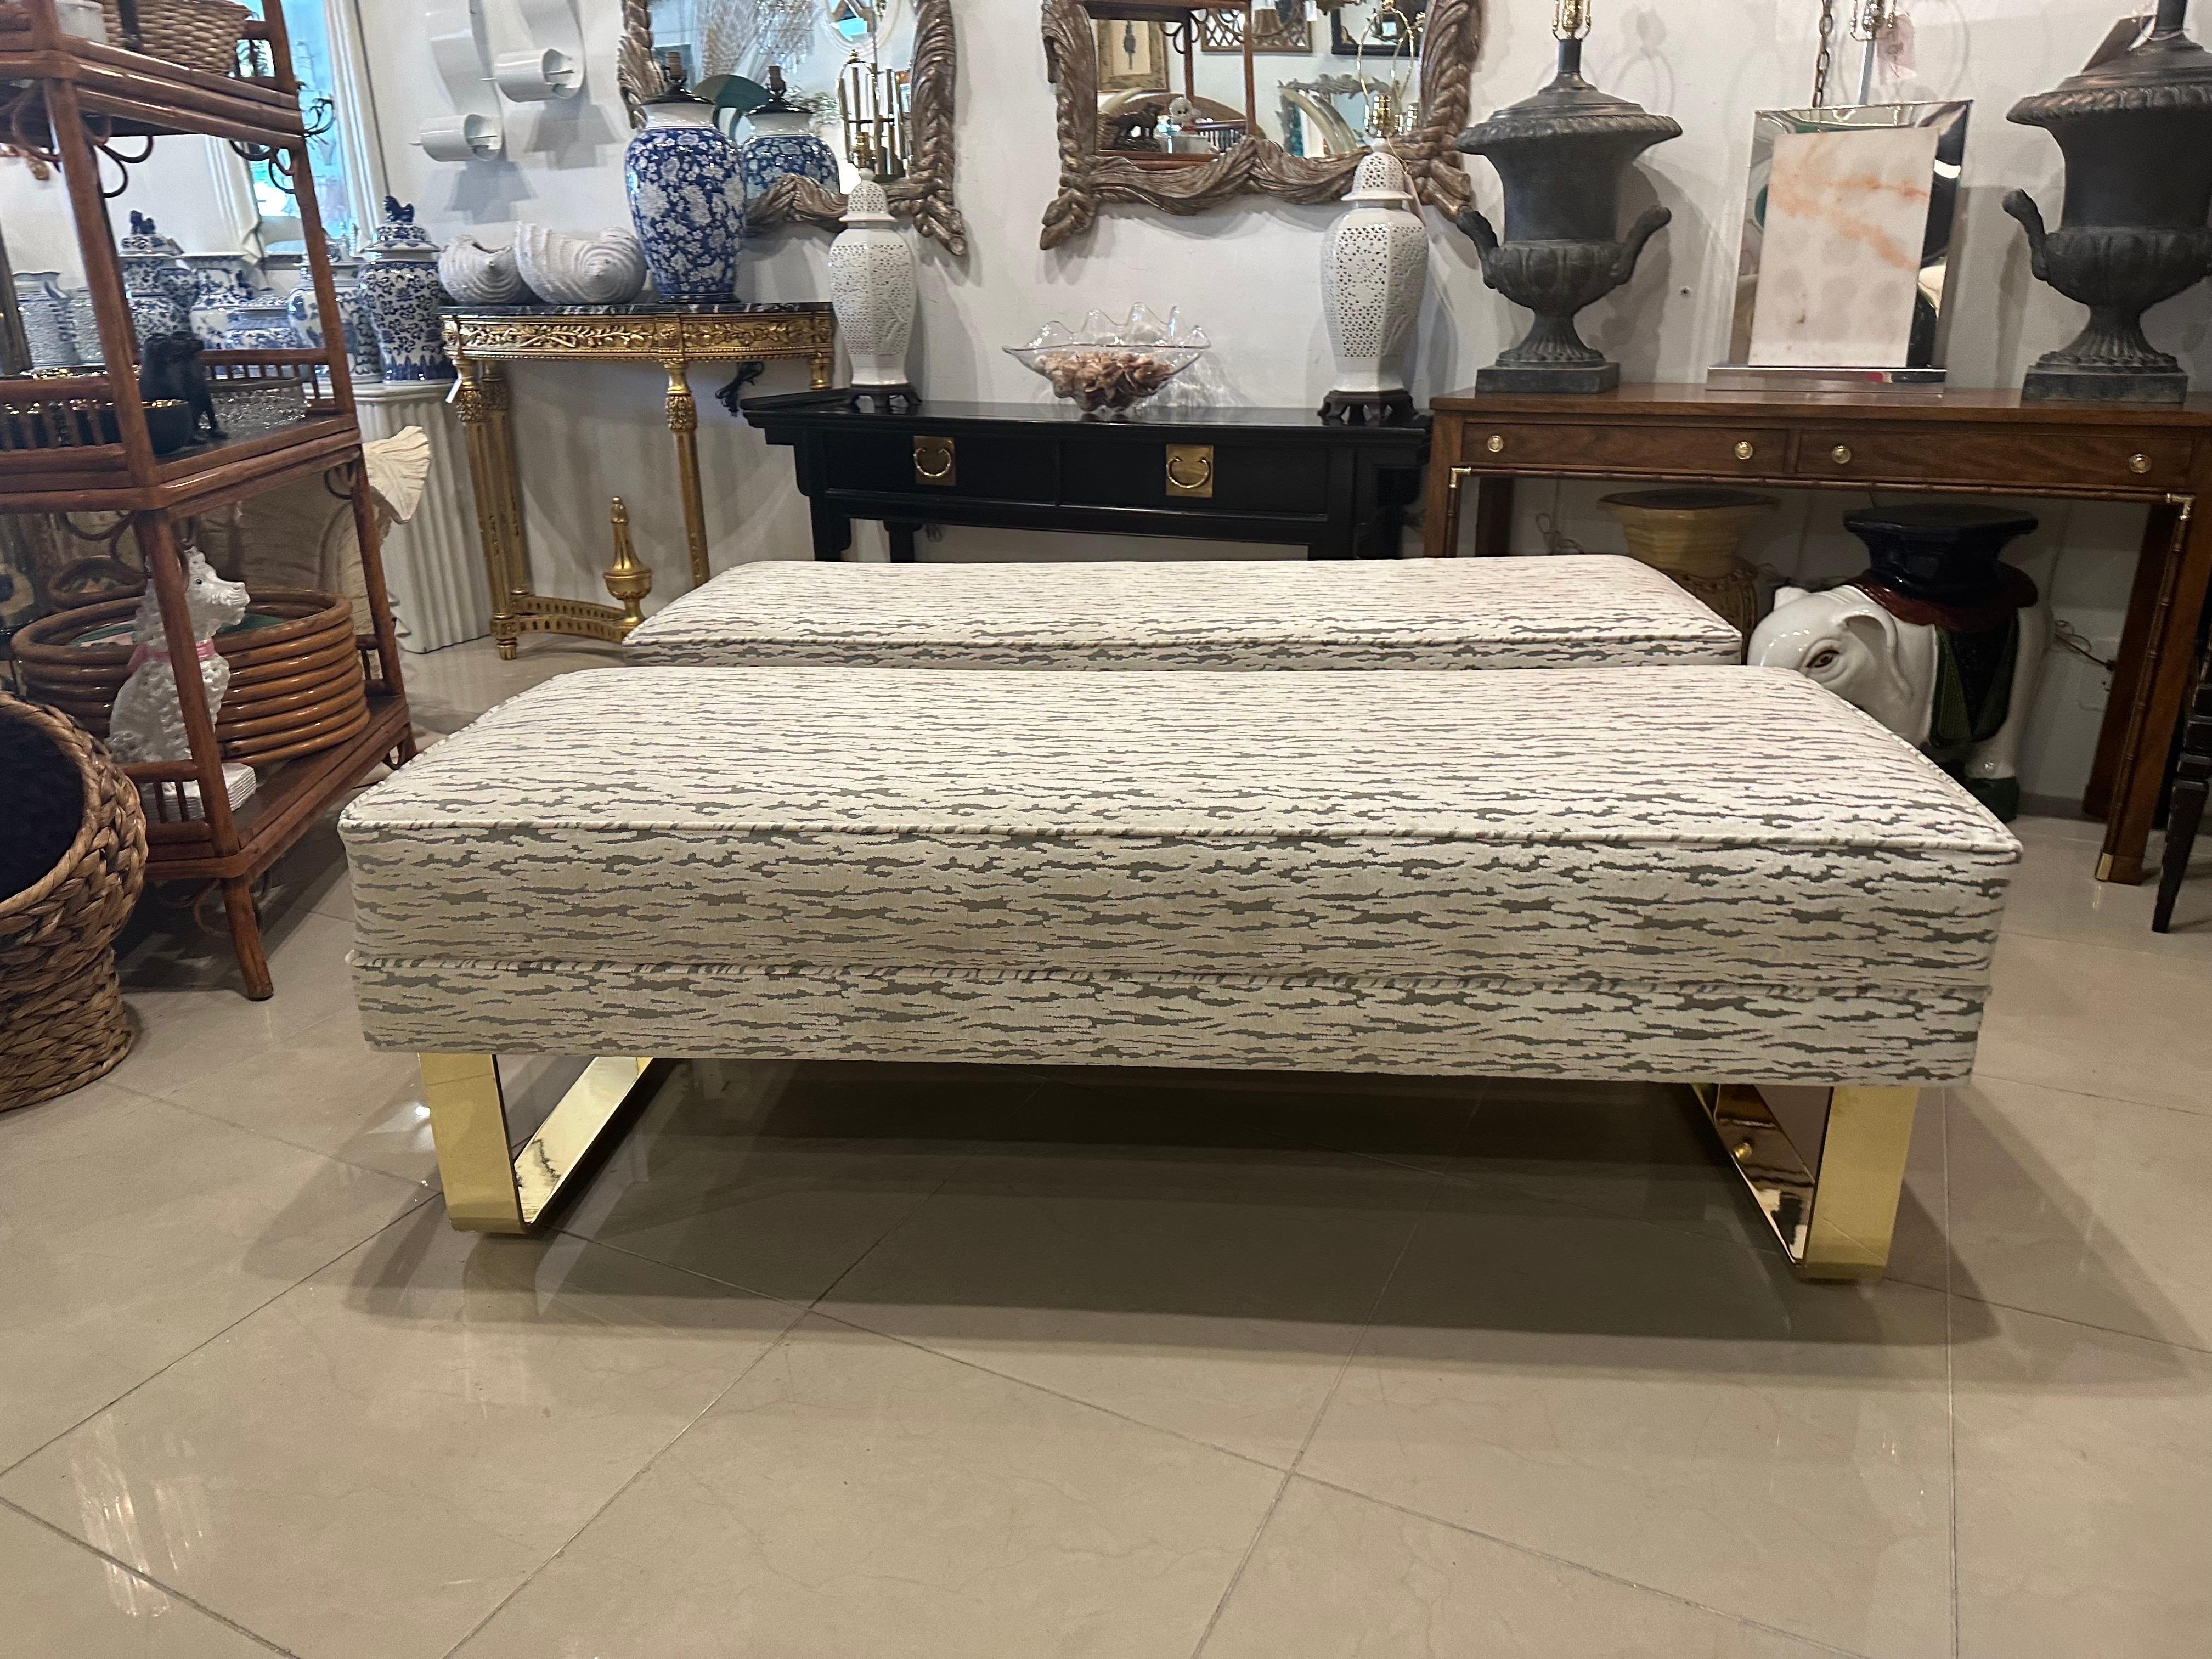 The most amazing brass bench, two available at time of listing. These are being sold individually. The brass waterfall legs are solid brass and heavy! They have been polished. Newly upholstered in a cut velvet faux bois fabric. These are from an